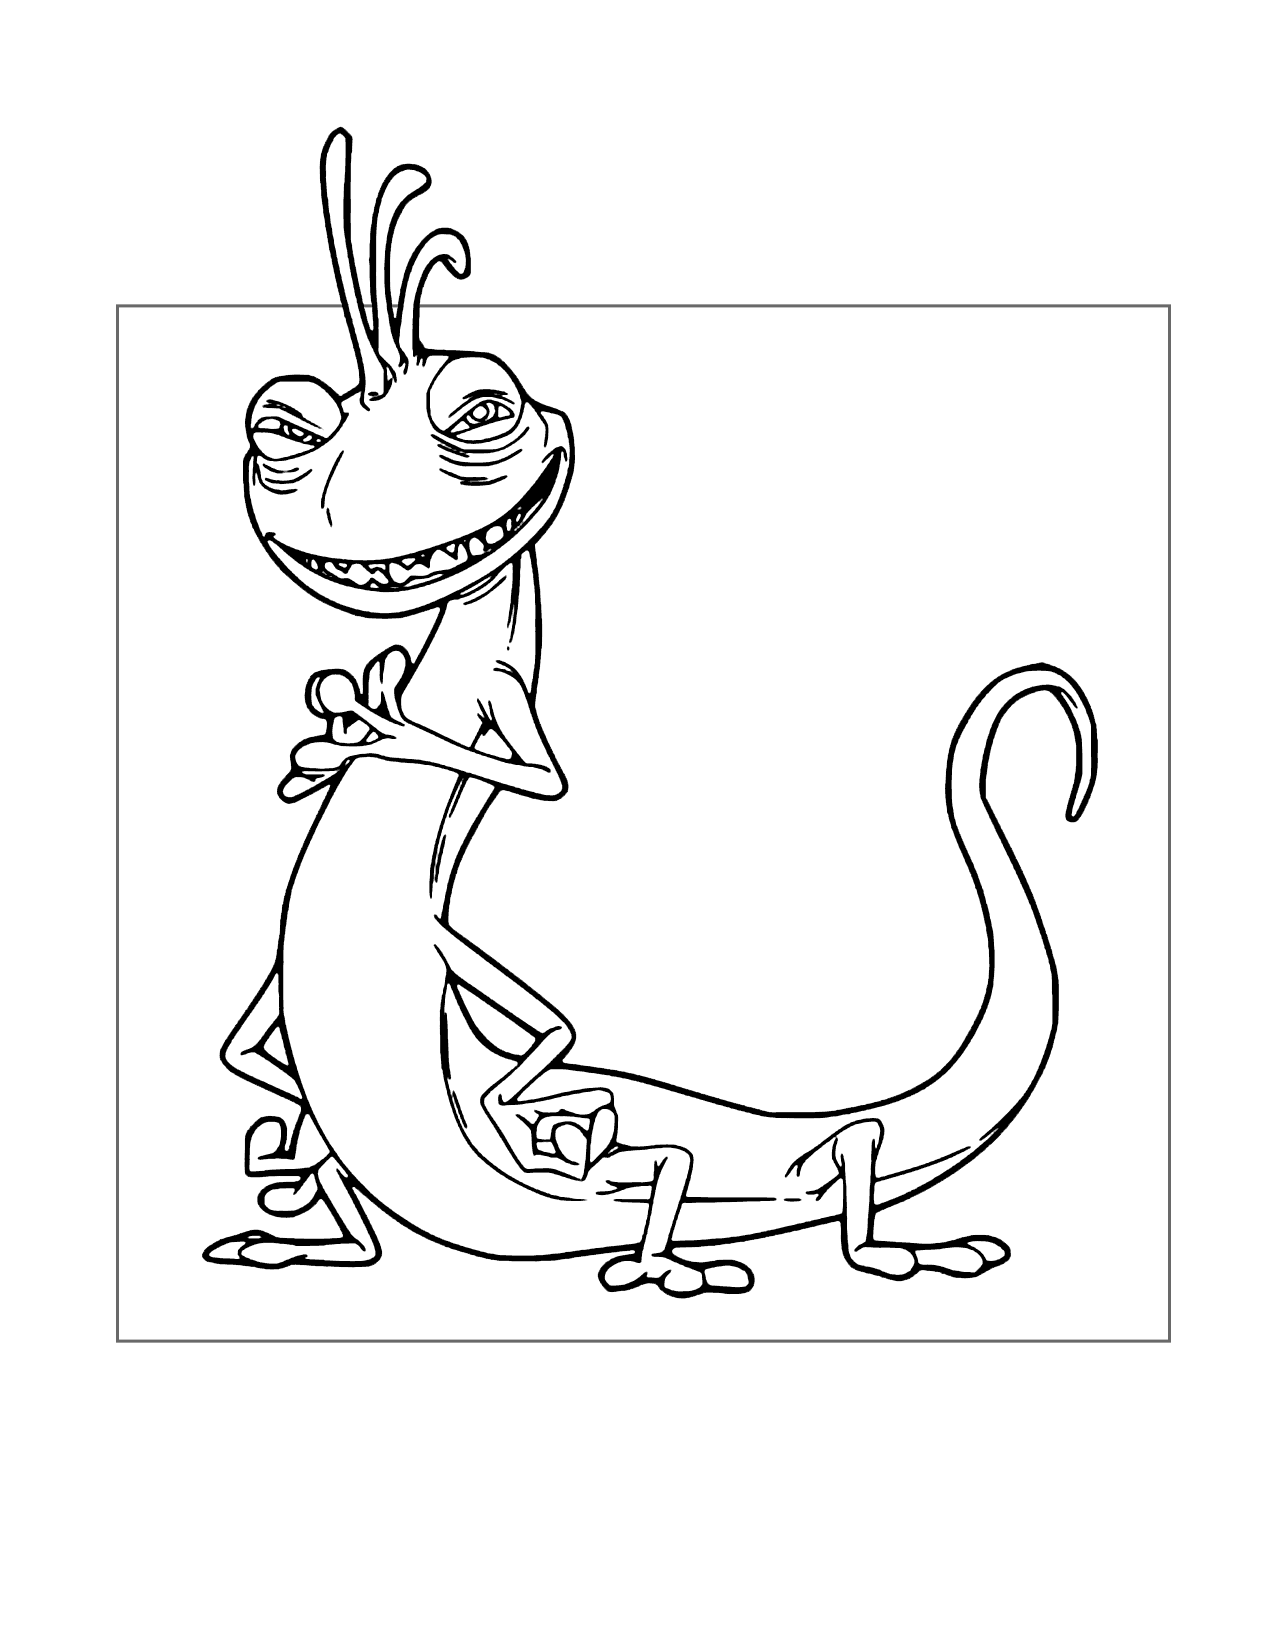 Randall Monsters Inc Coloring Page